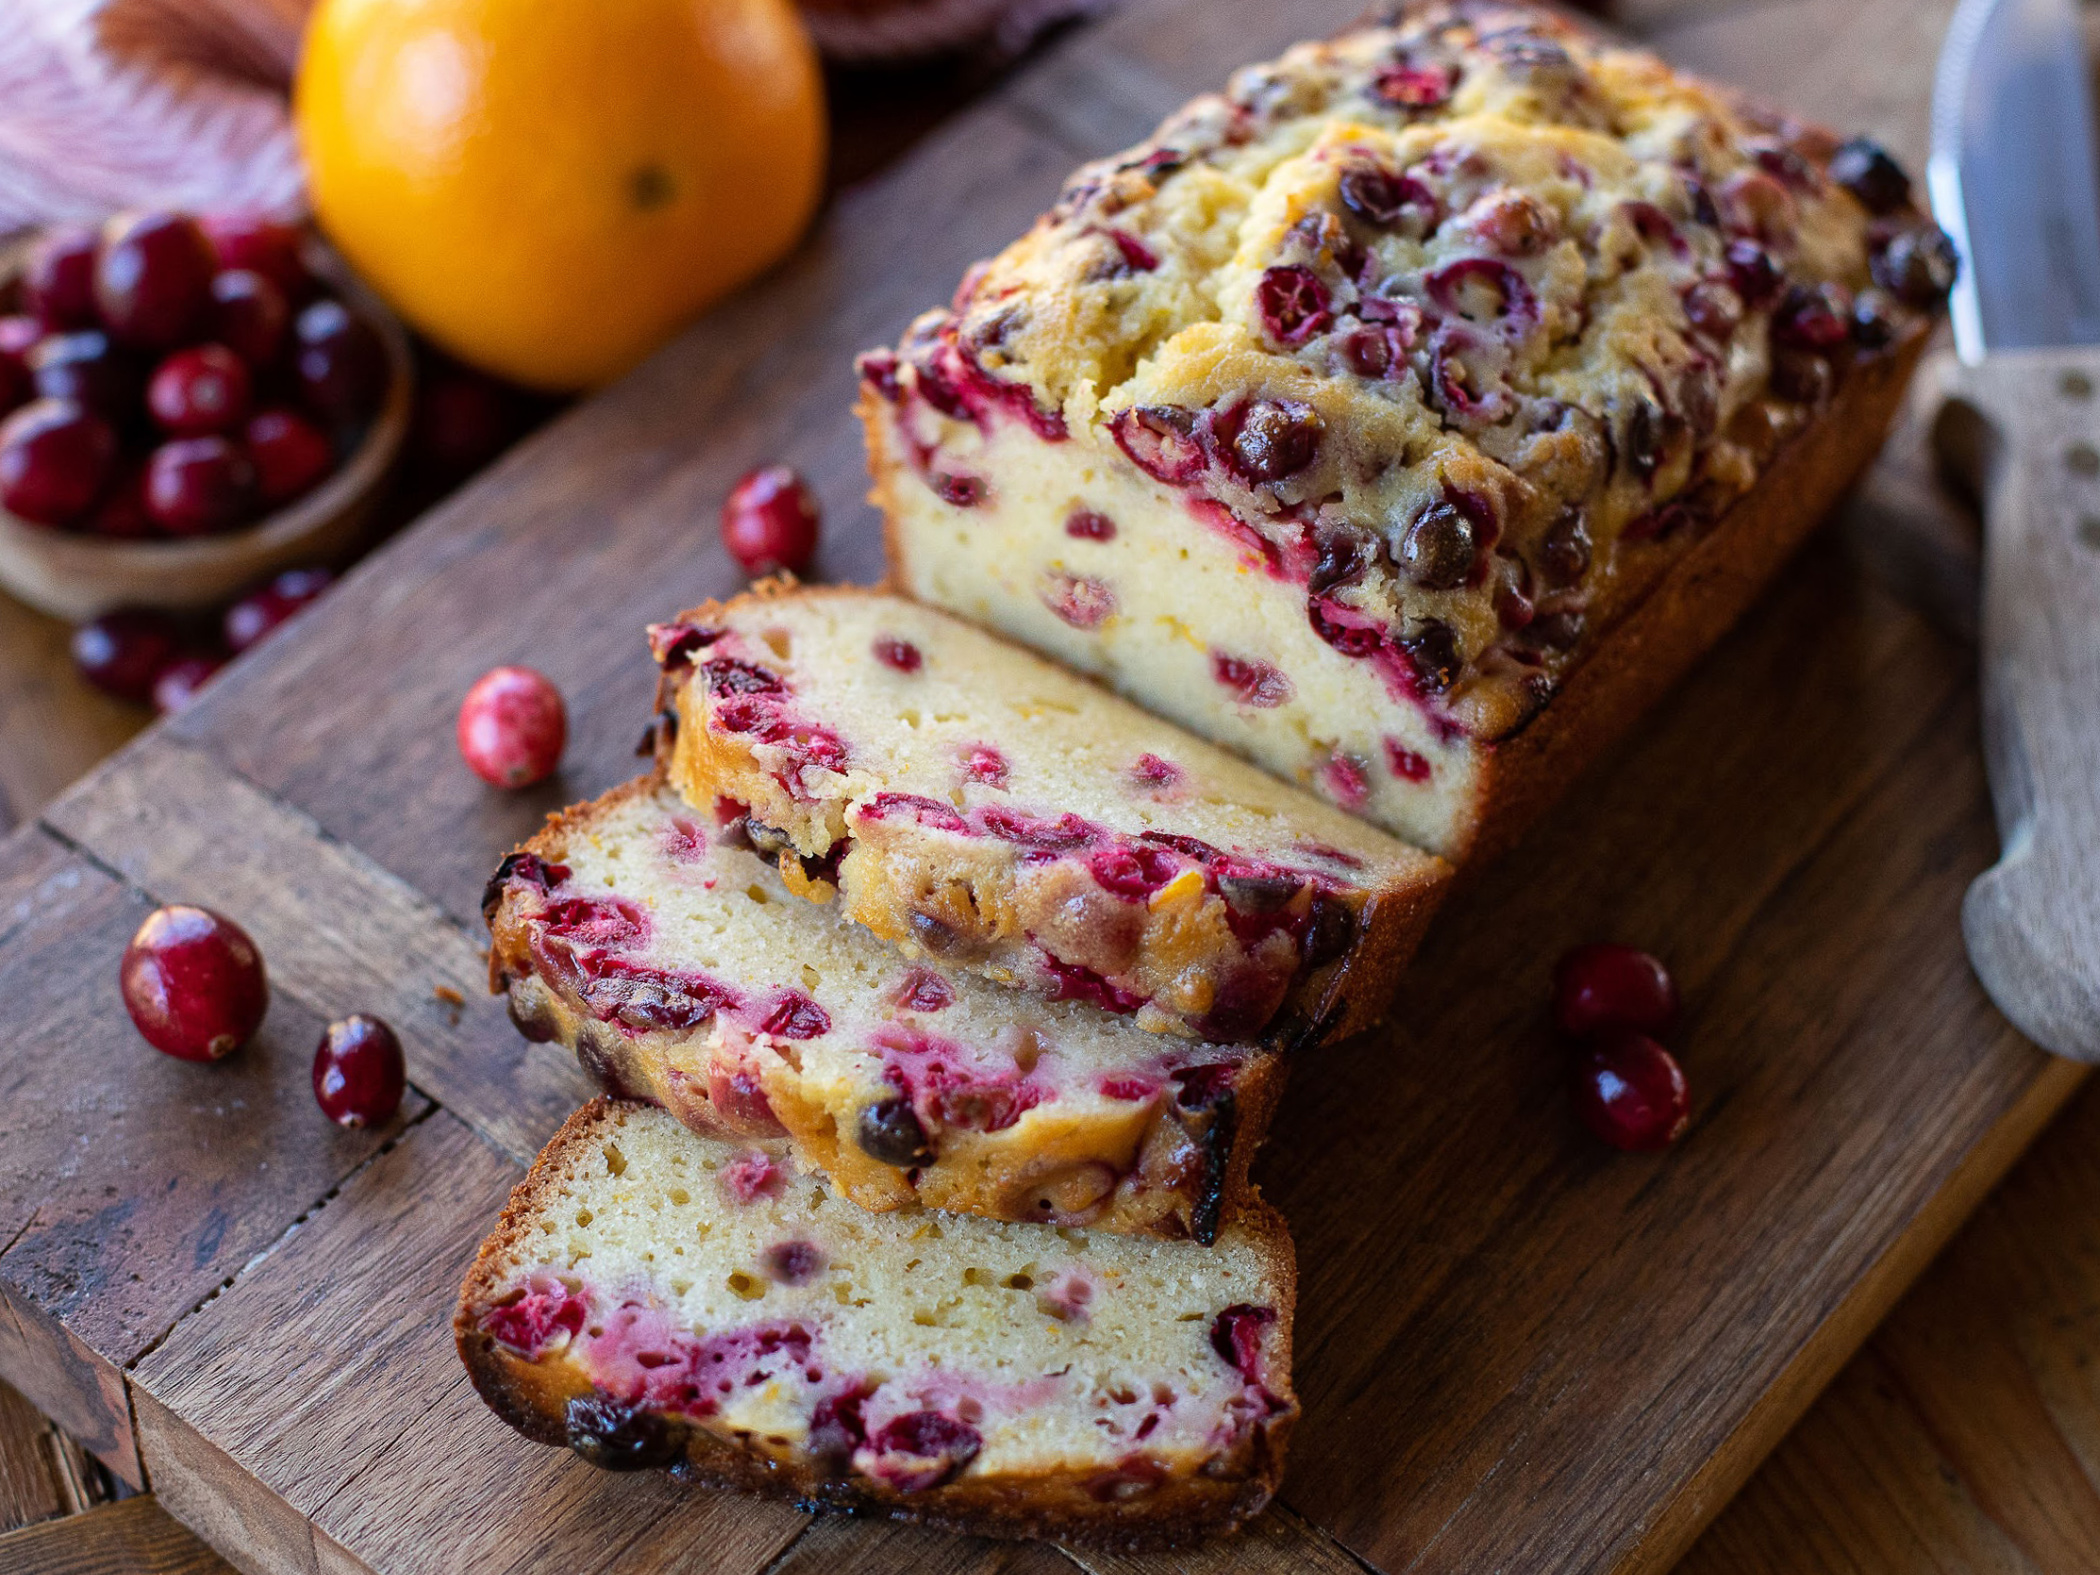 Crisco Oil Makes All Your Holiday Recipes Taste Great - Use It To Try My Cranberry-Orange Bread on I Heart Publix